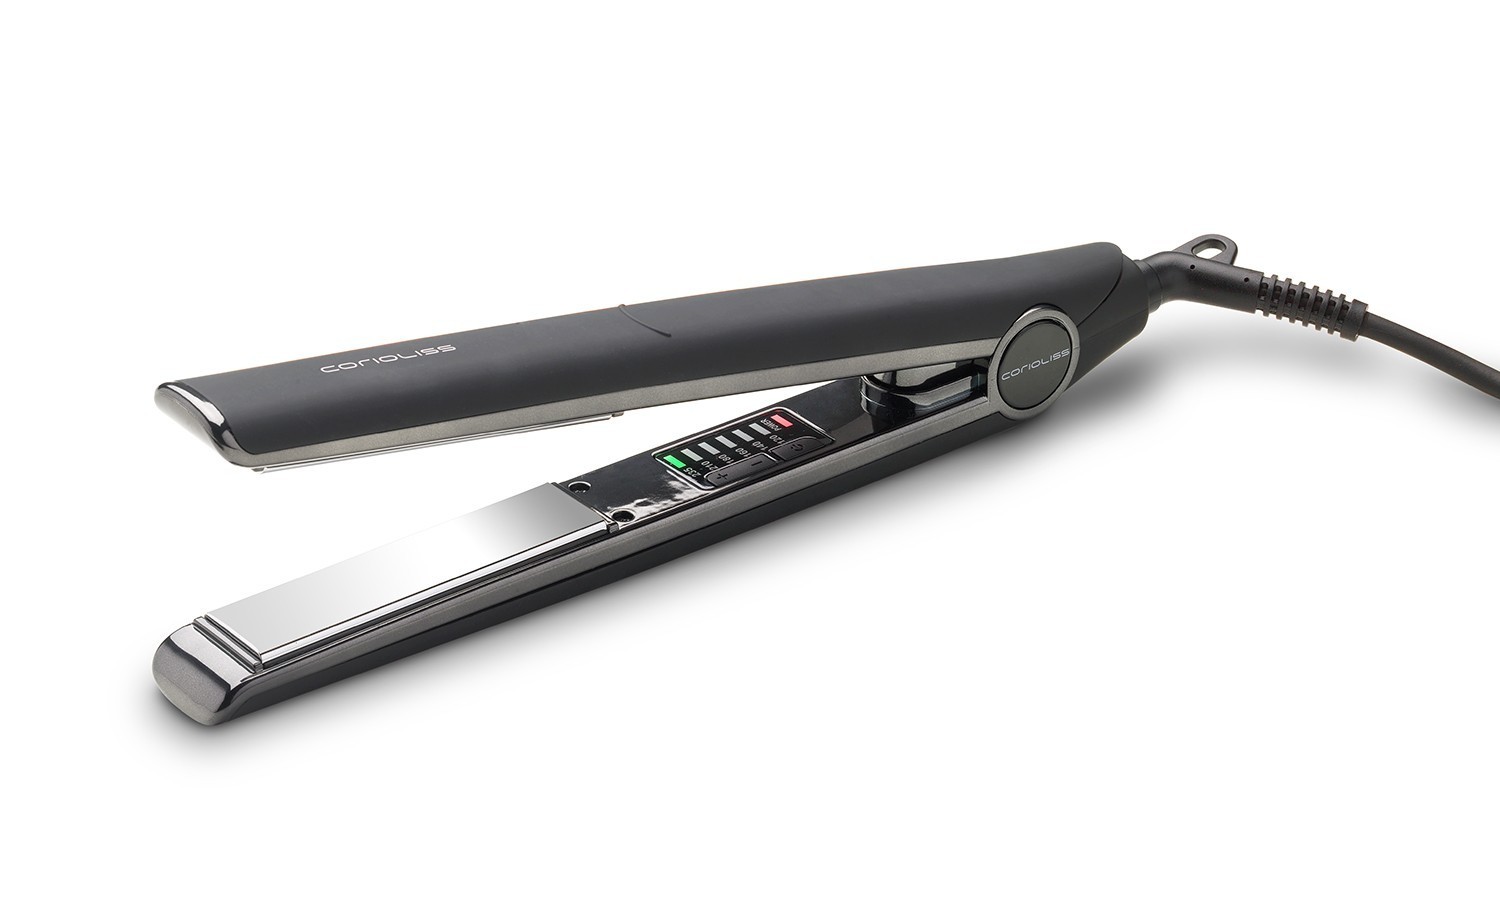 Corioliss Professional Conical Hair Curling Iron Glamour Wand Ceramic -  Black | eBay